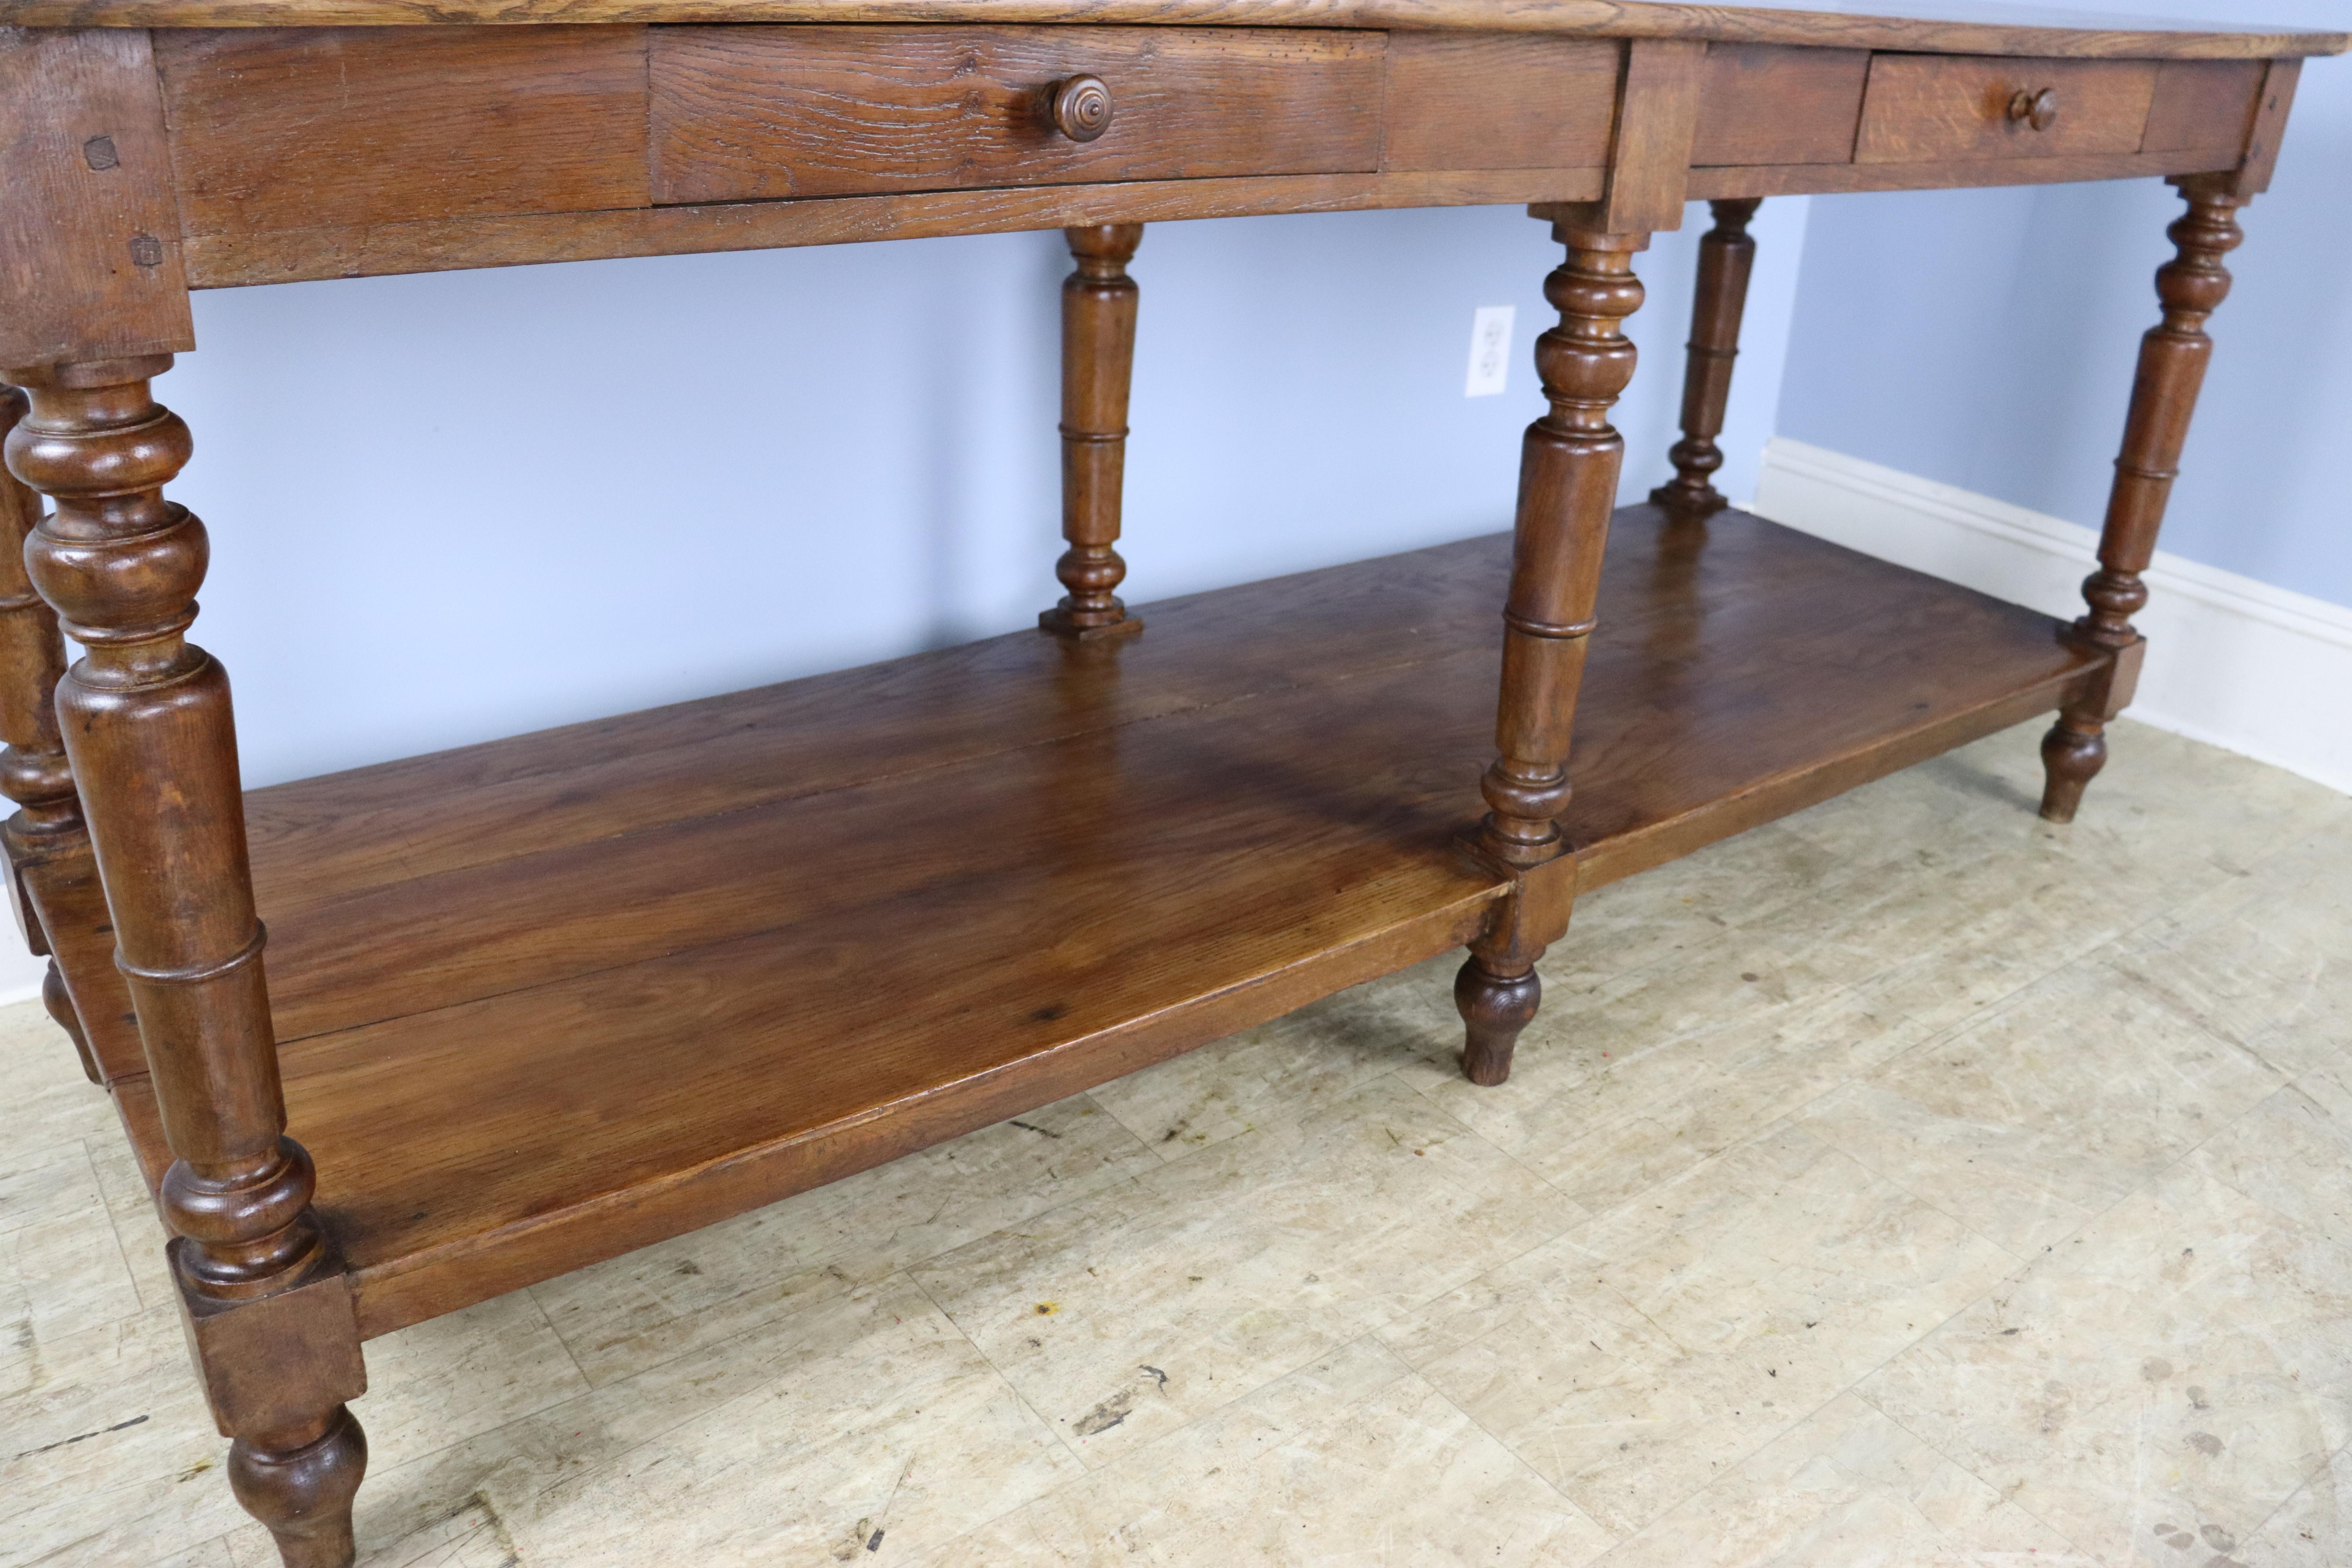 Antique Chestnut Draper's Table with Turned Legs 4